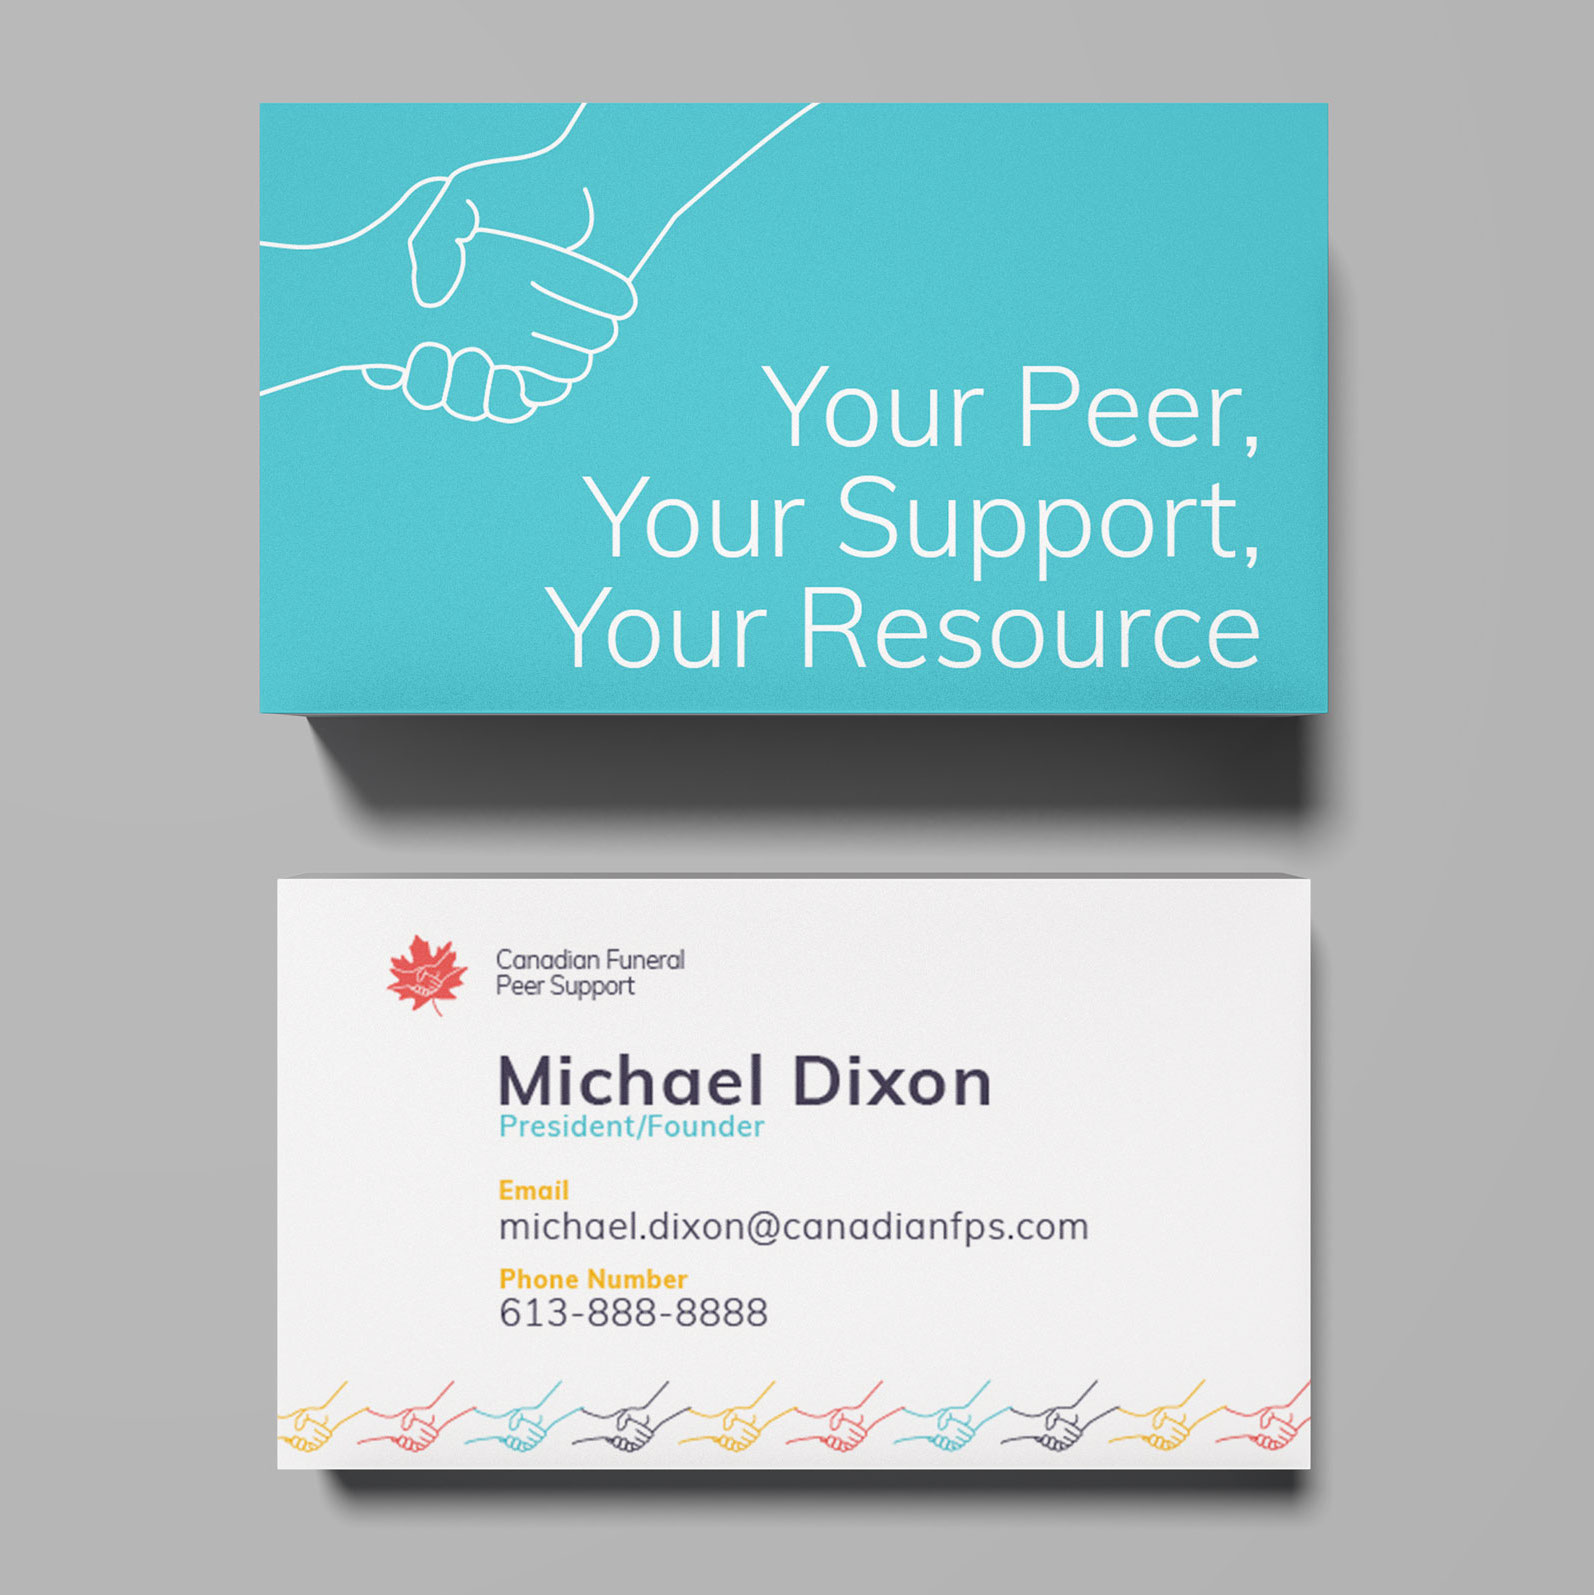 A positive business card for a funeral support group